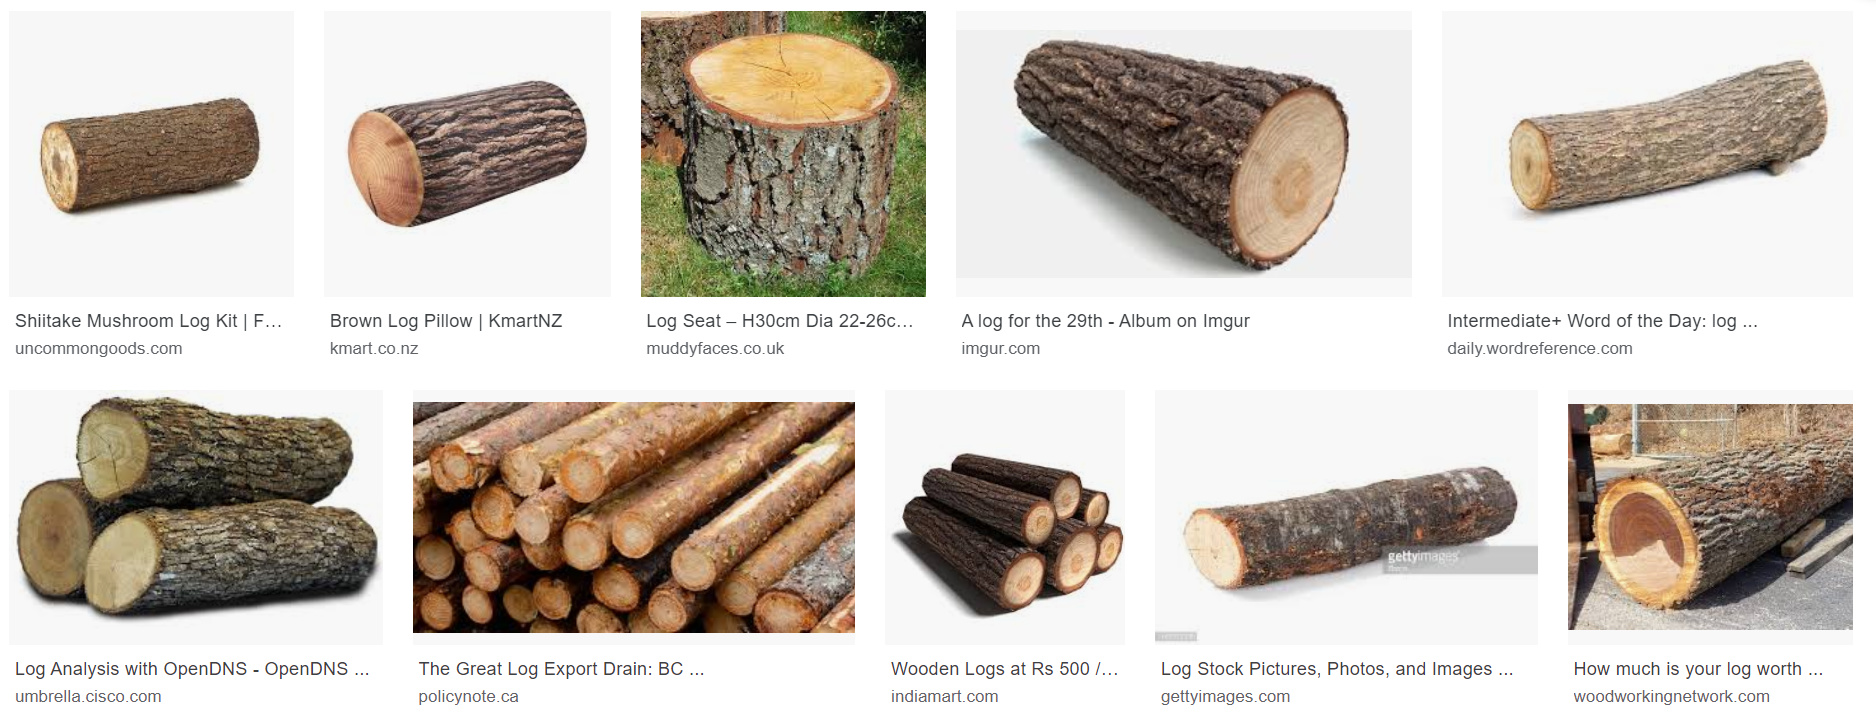 How much is your log worth?